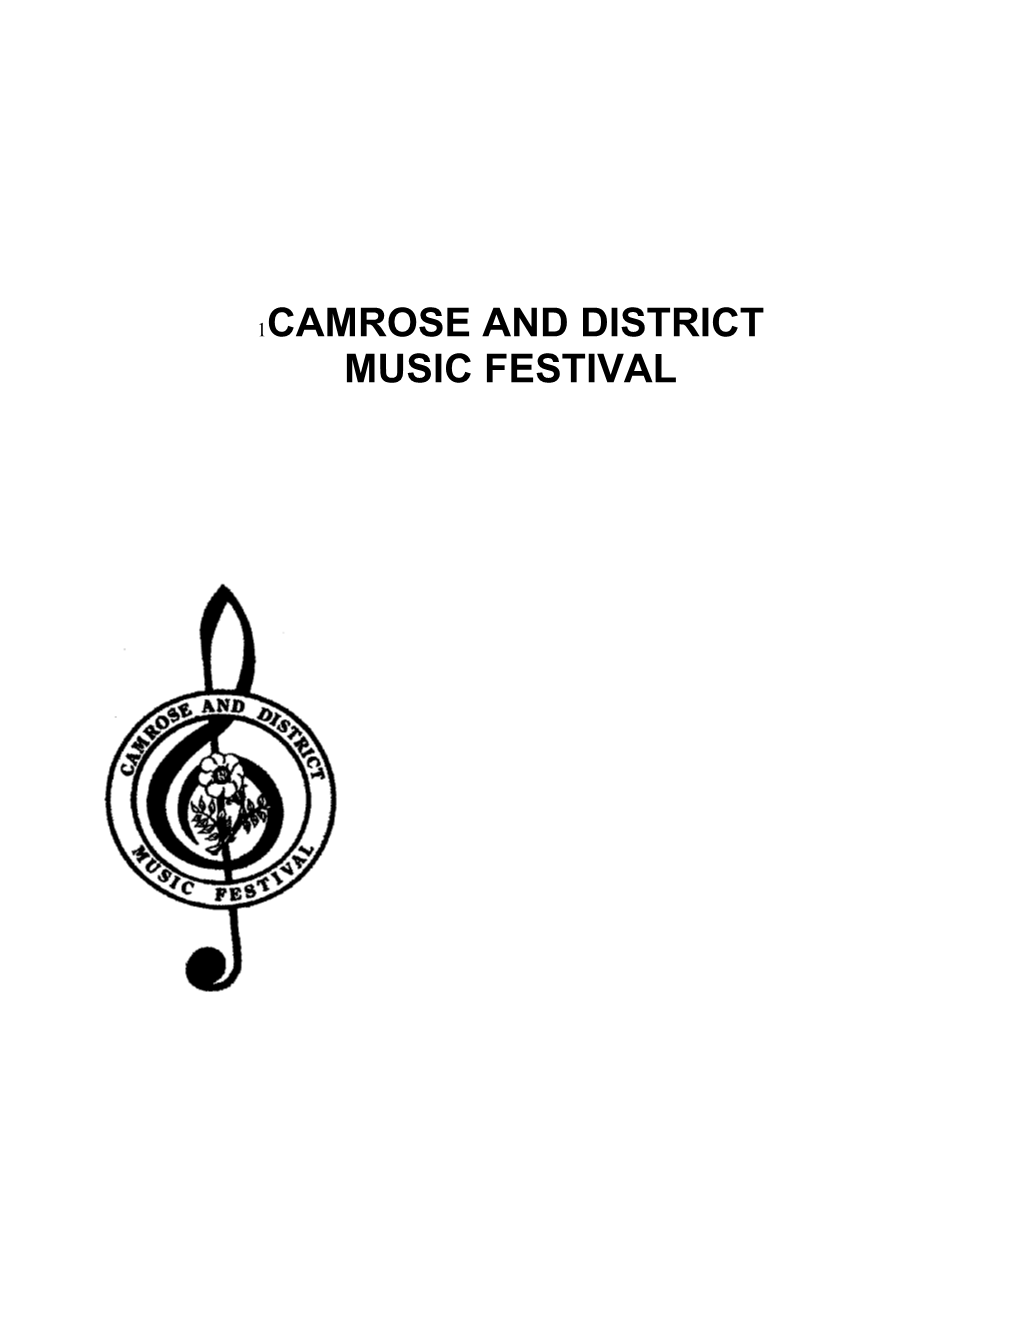 Camrose and District